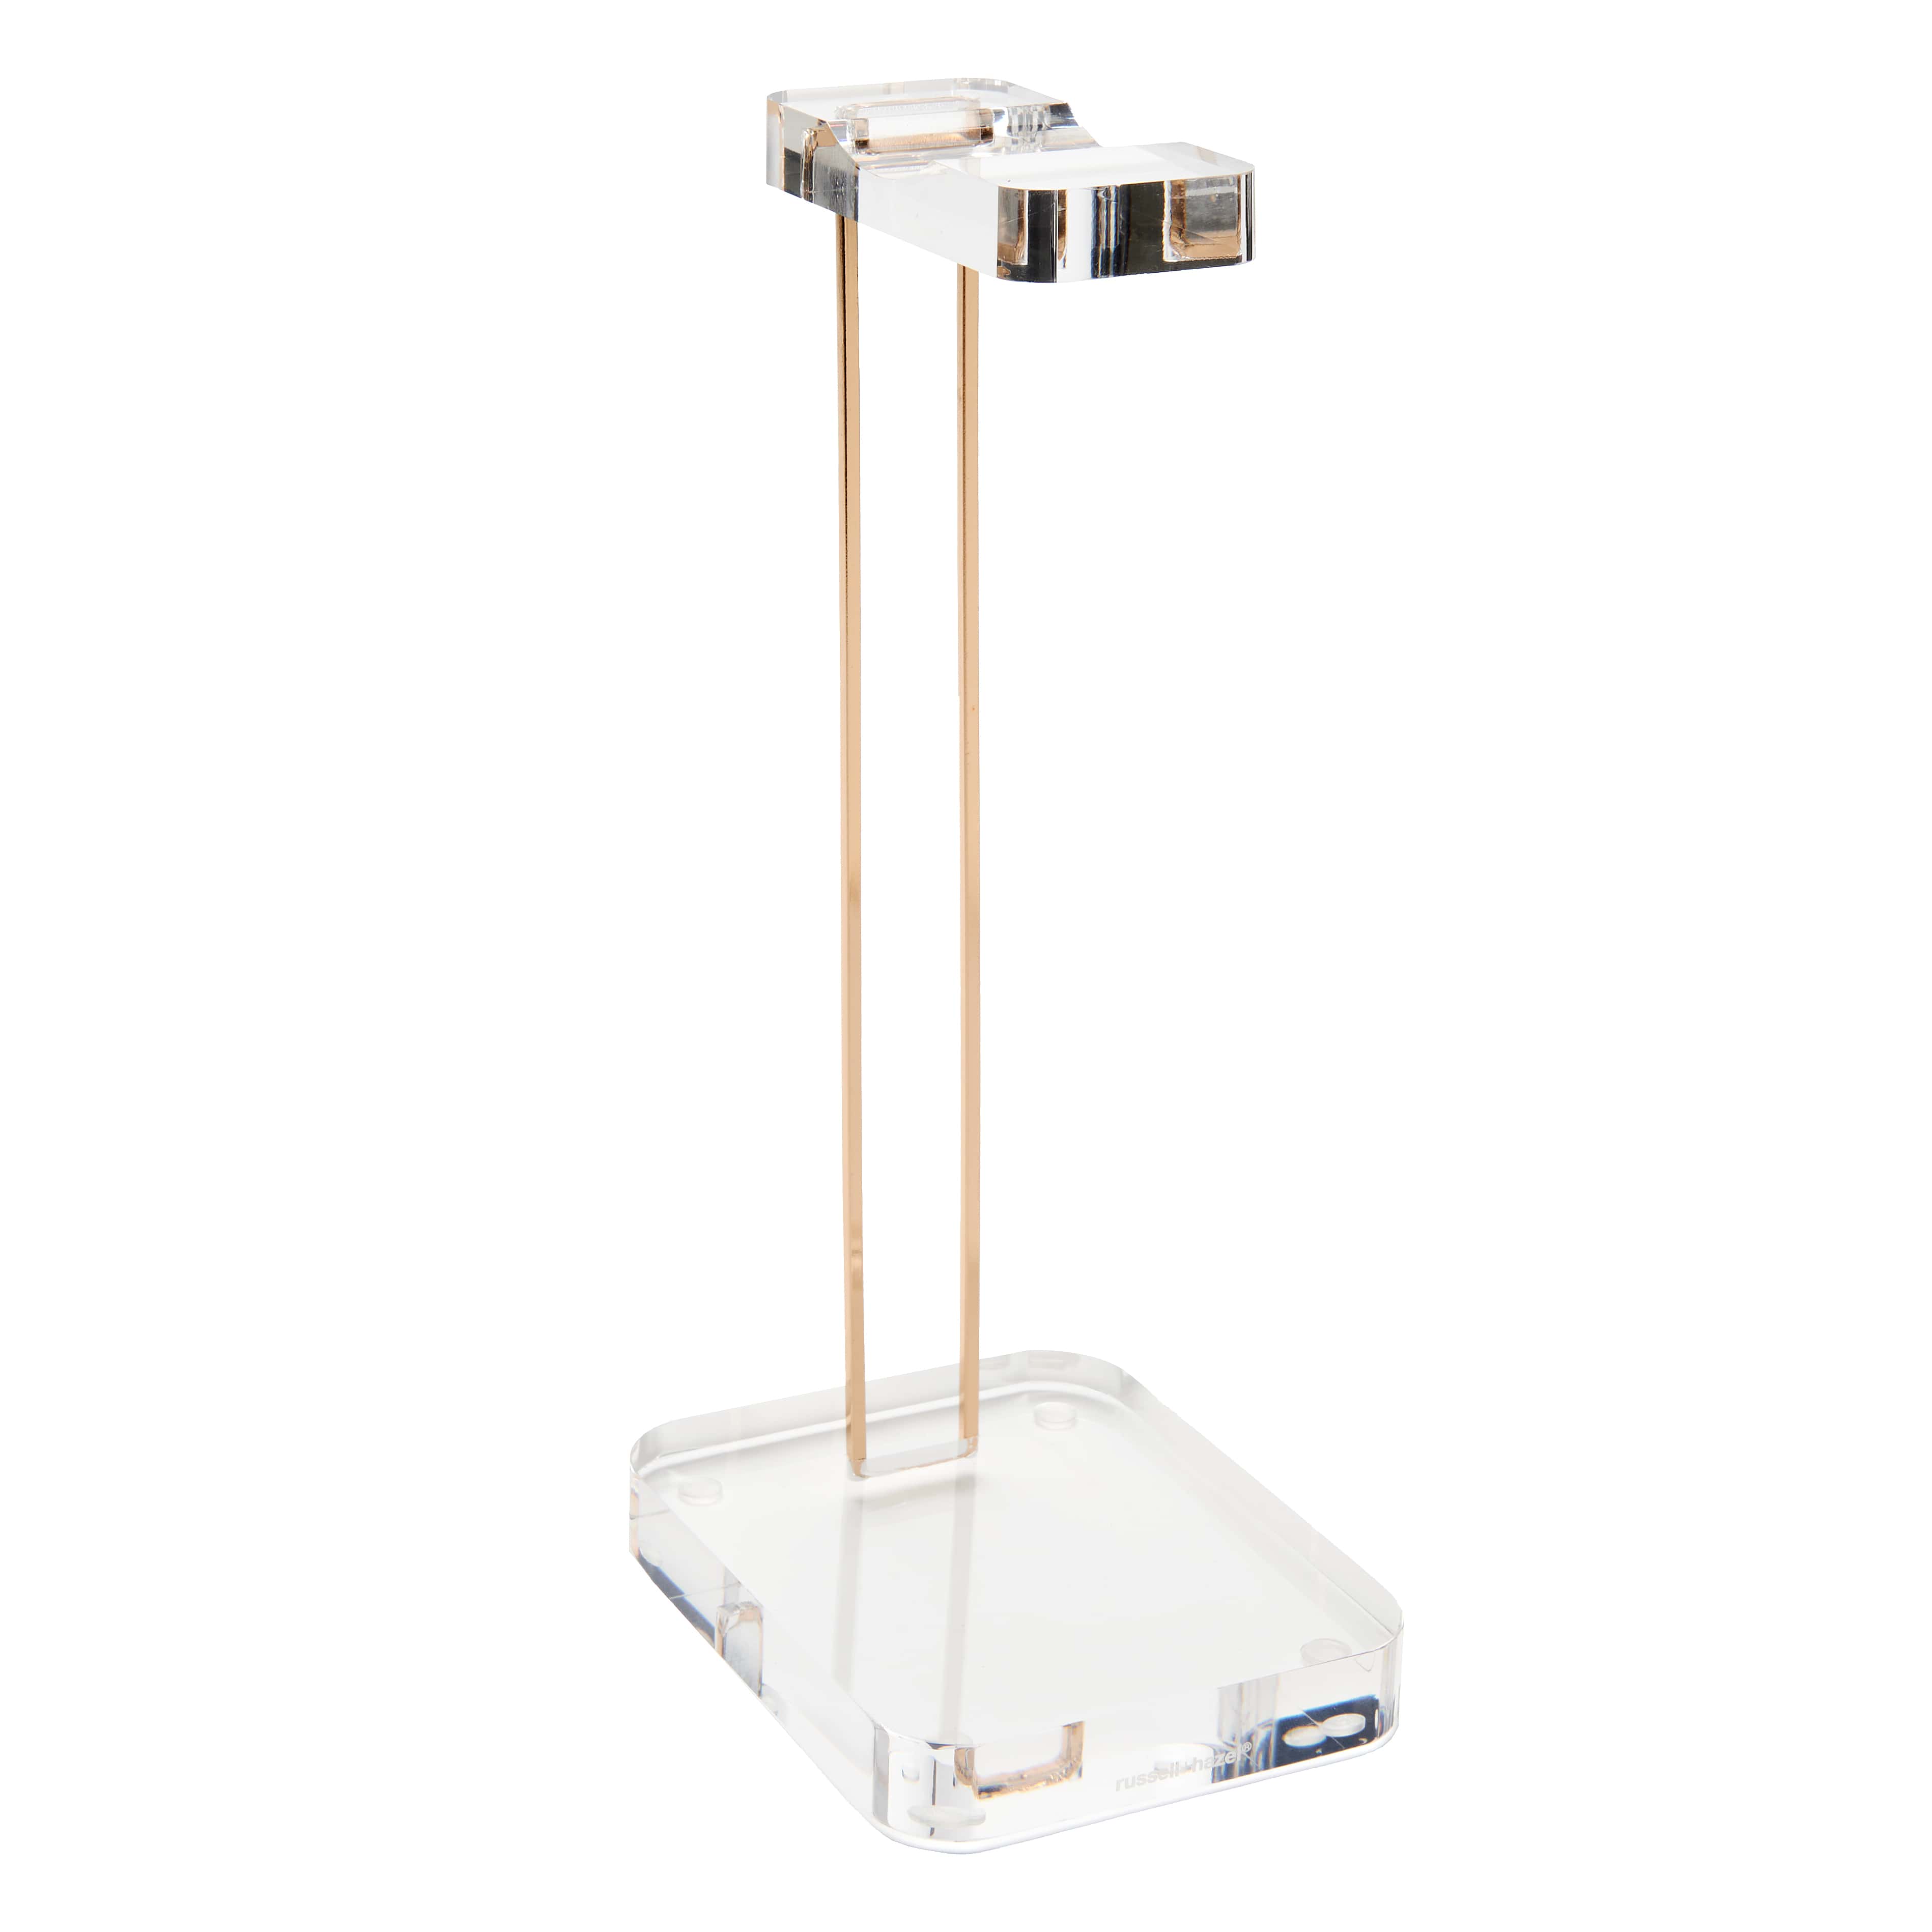 Luckies Rock on Headphone Display Stand, Gold